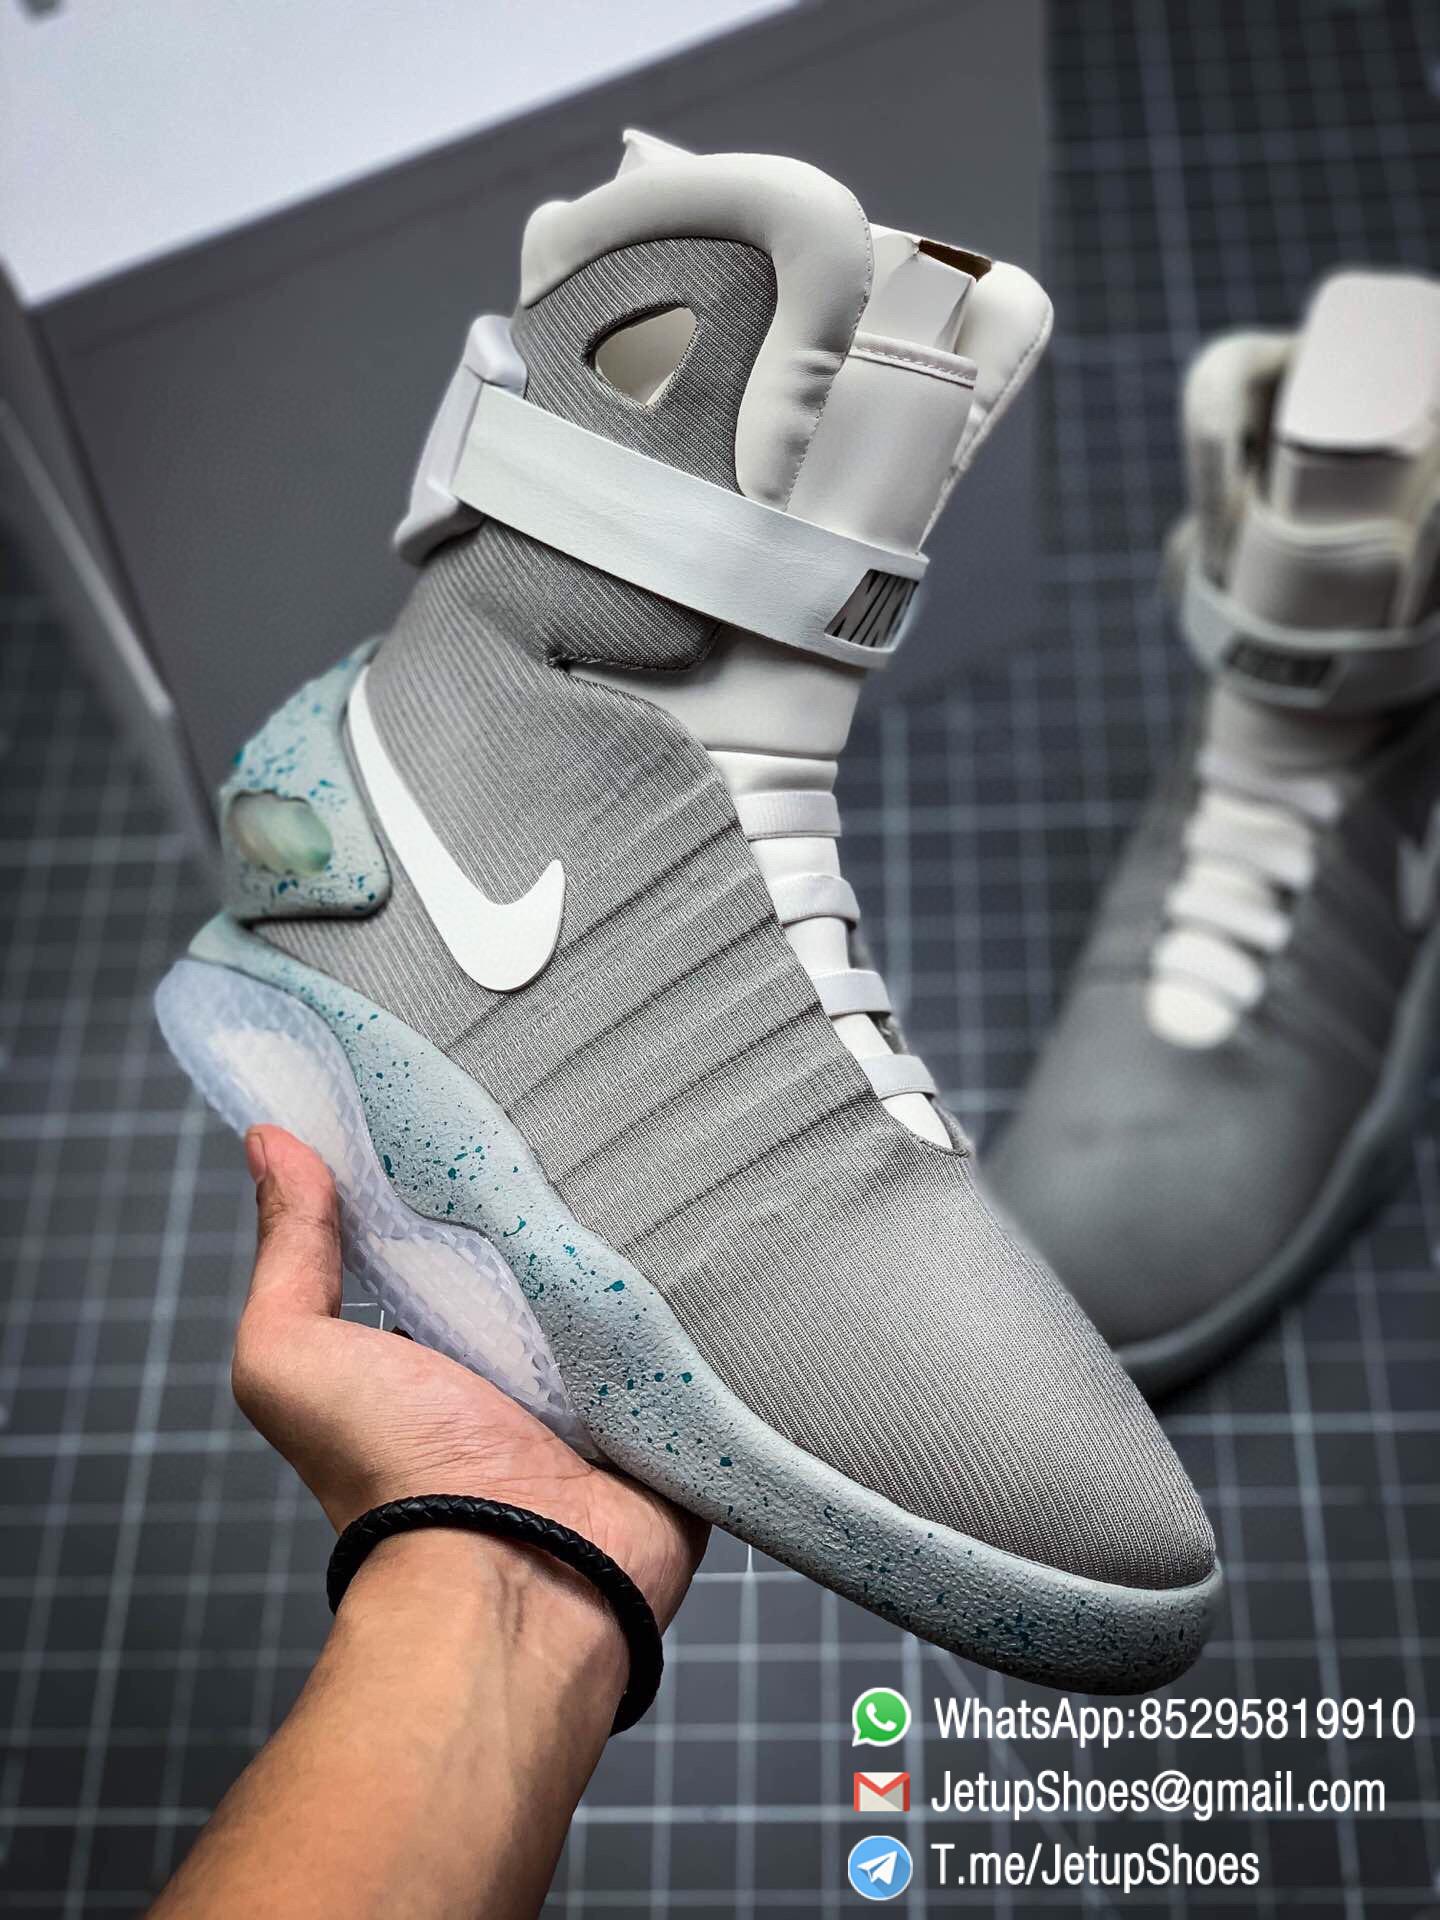 Best RepSneakers Nike Mag Back To The Future SKU 417744 001 LED Array Self Lacing 01